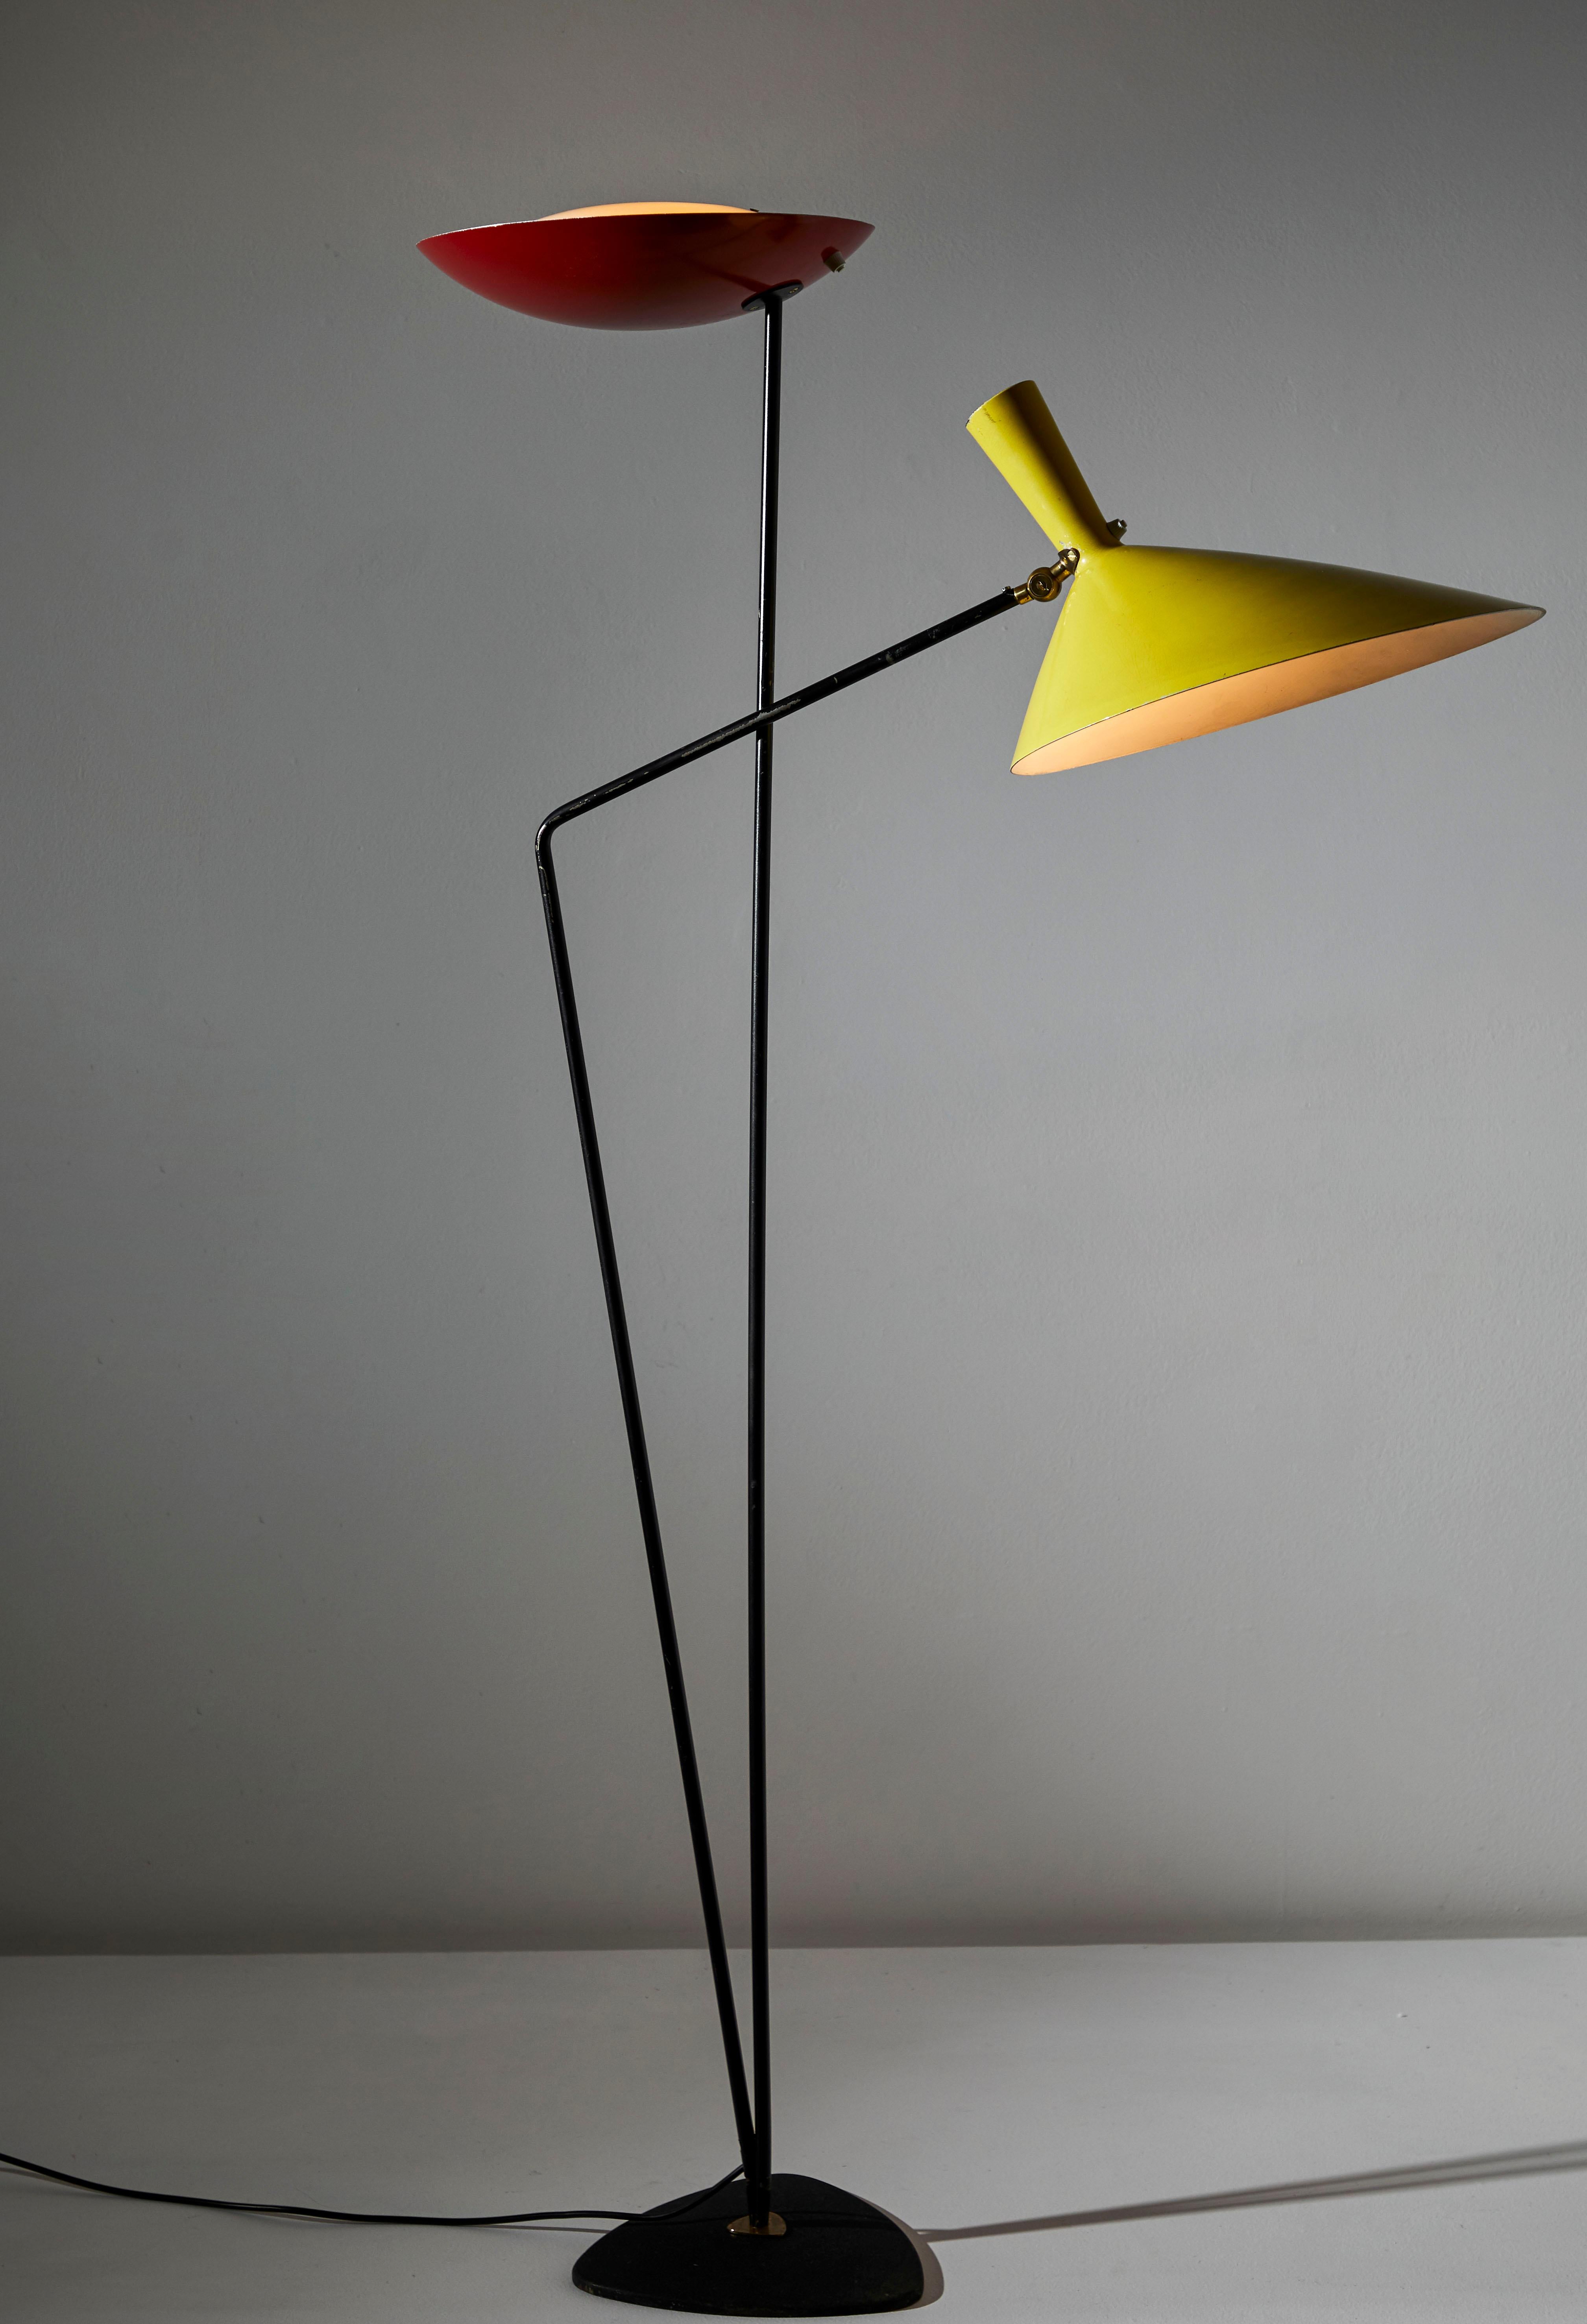 Floor Lamp by Prof. Carl Moor for BAG Turgi. Designed and manufactured in Switzerland circa, 1950's. Enameled metal, brass, acrylic. Original cord. Takes two E27 40w maximum bulbs. Bulbs provided as a onetime courtesy.